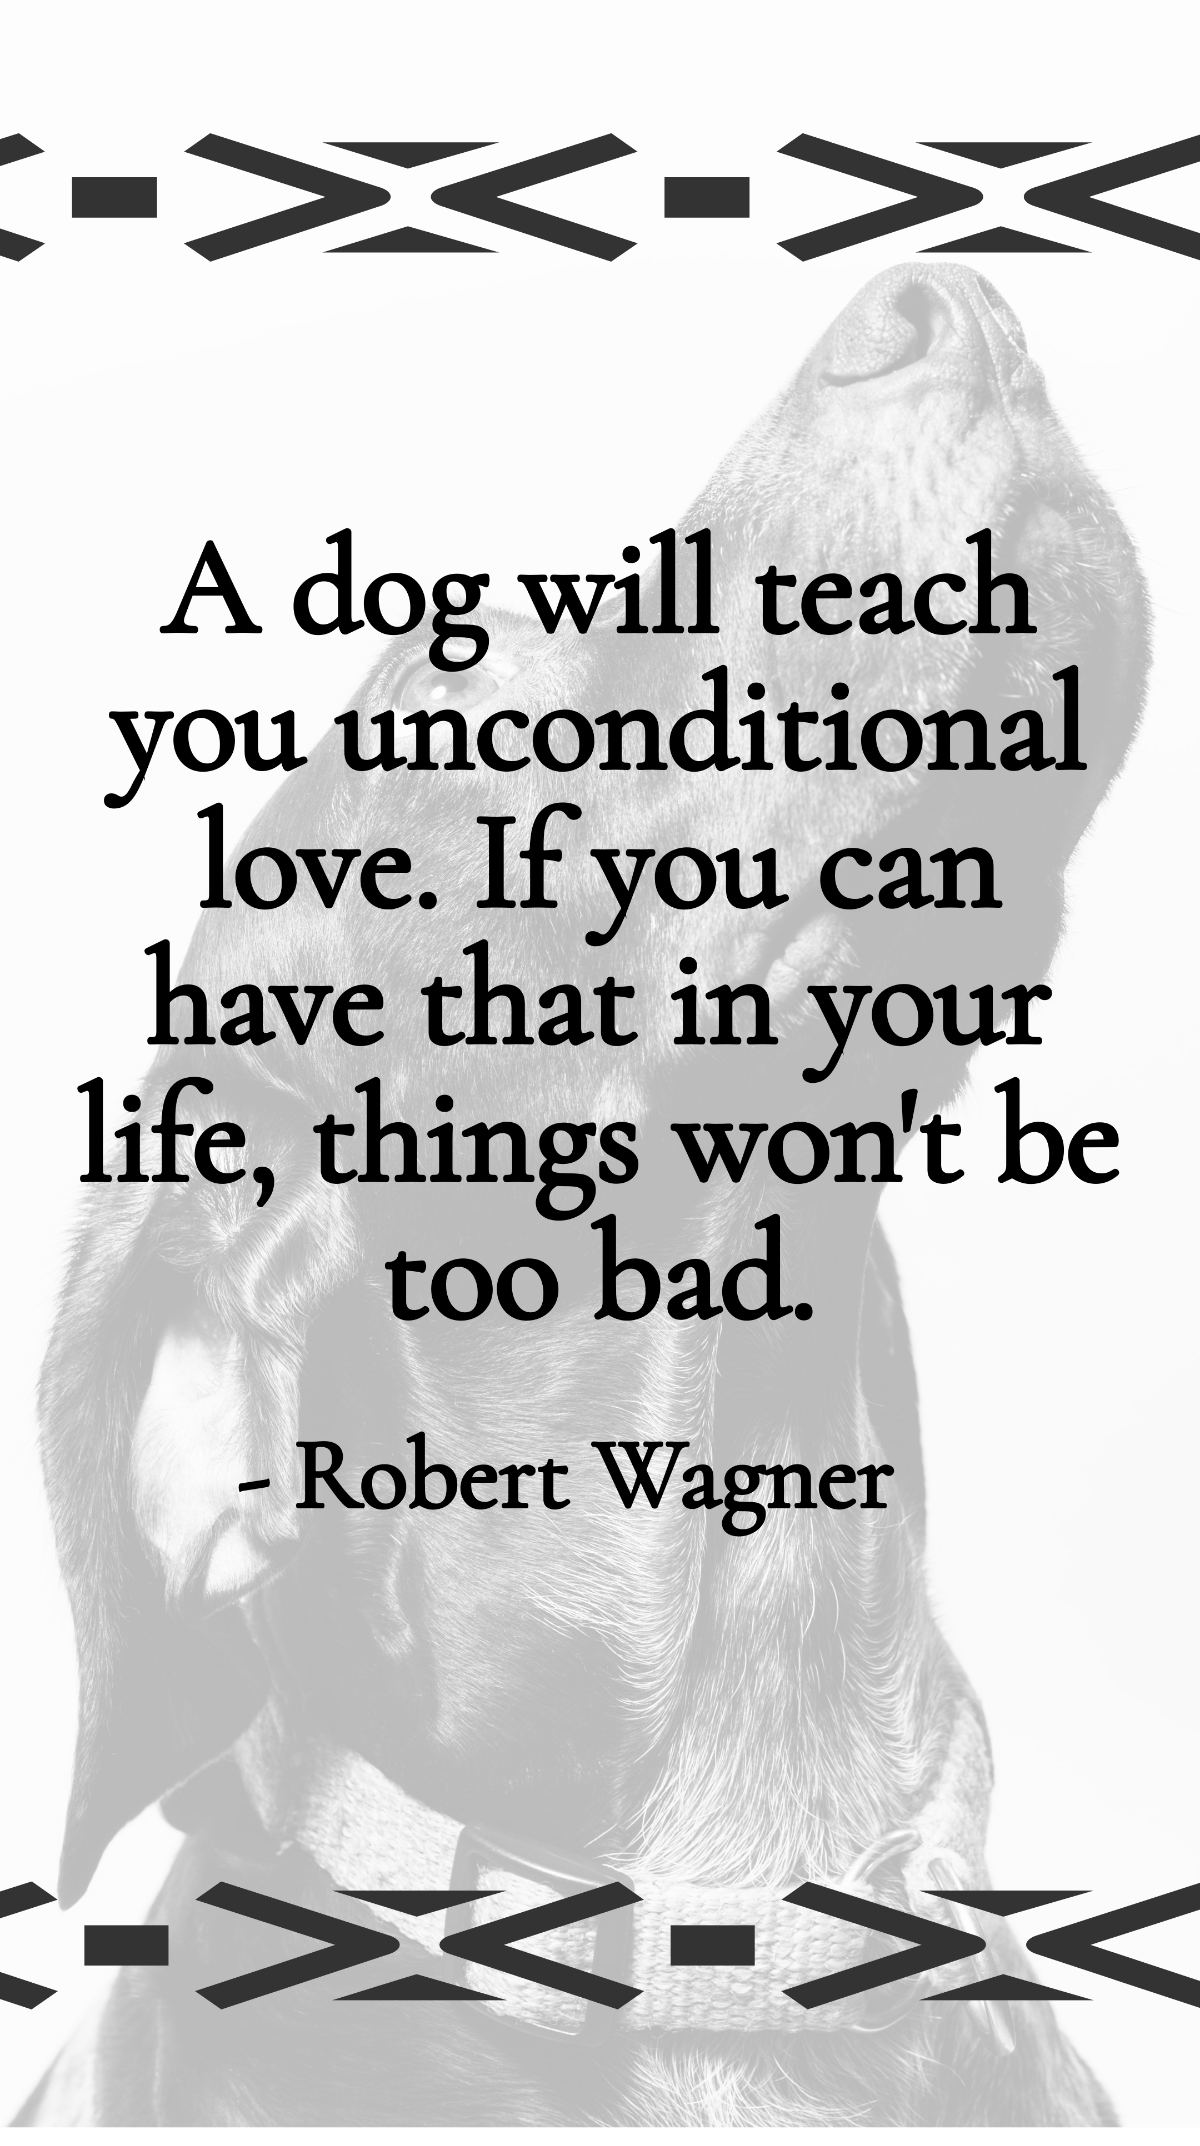 Free Robert Wagner - A dog will teach you unconditional love. If you can have that in your life, things won't be too bad. Template